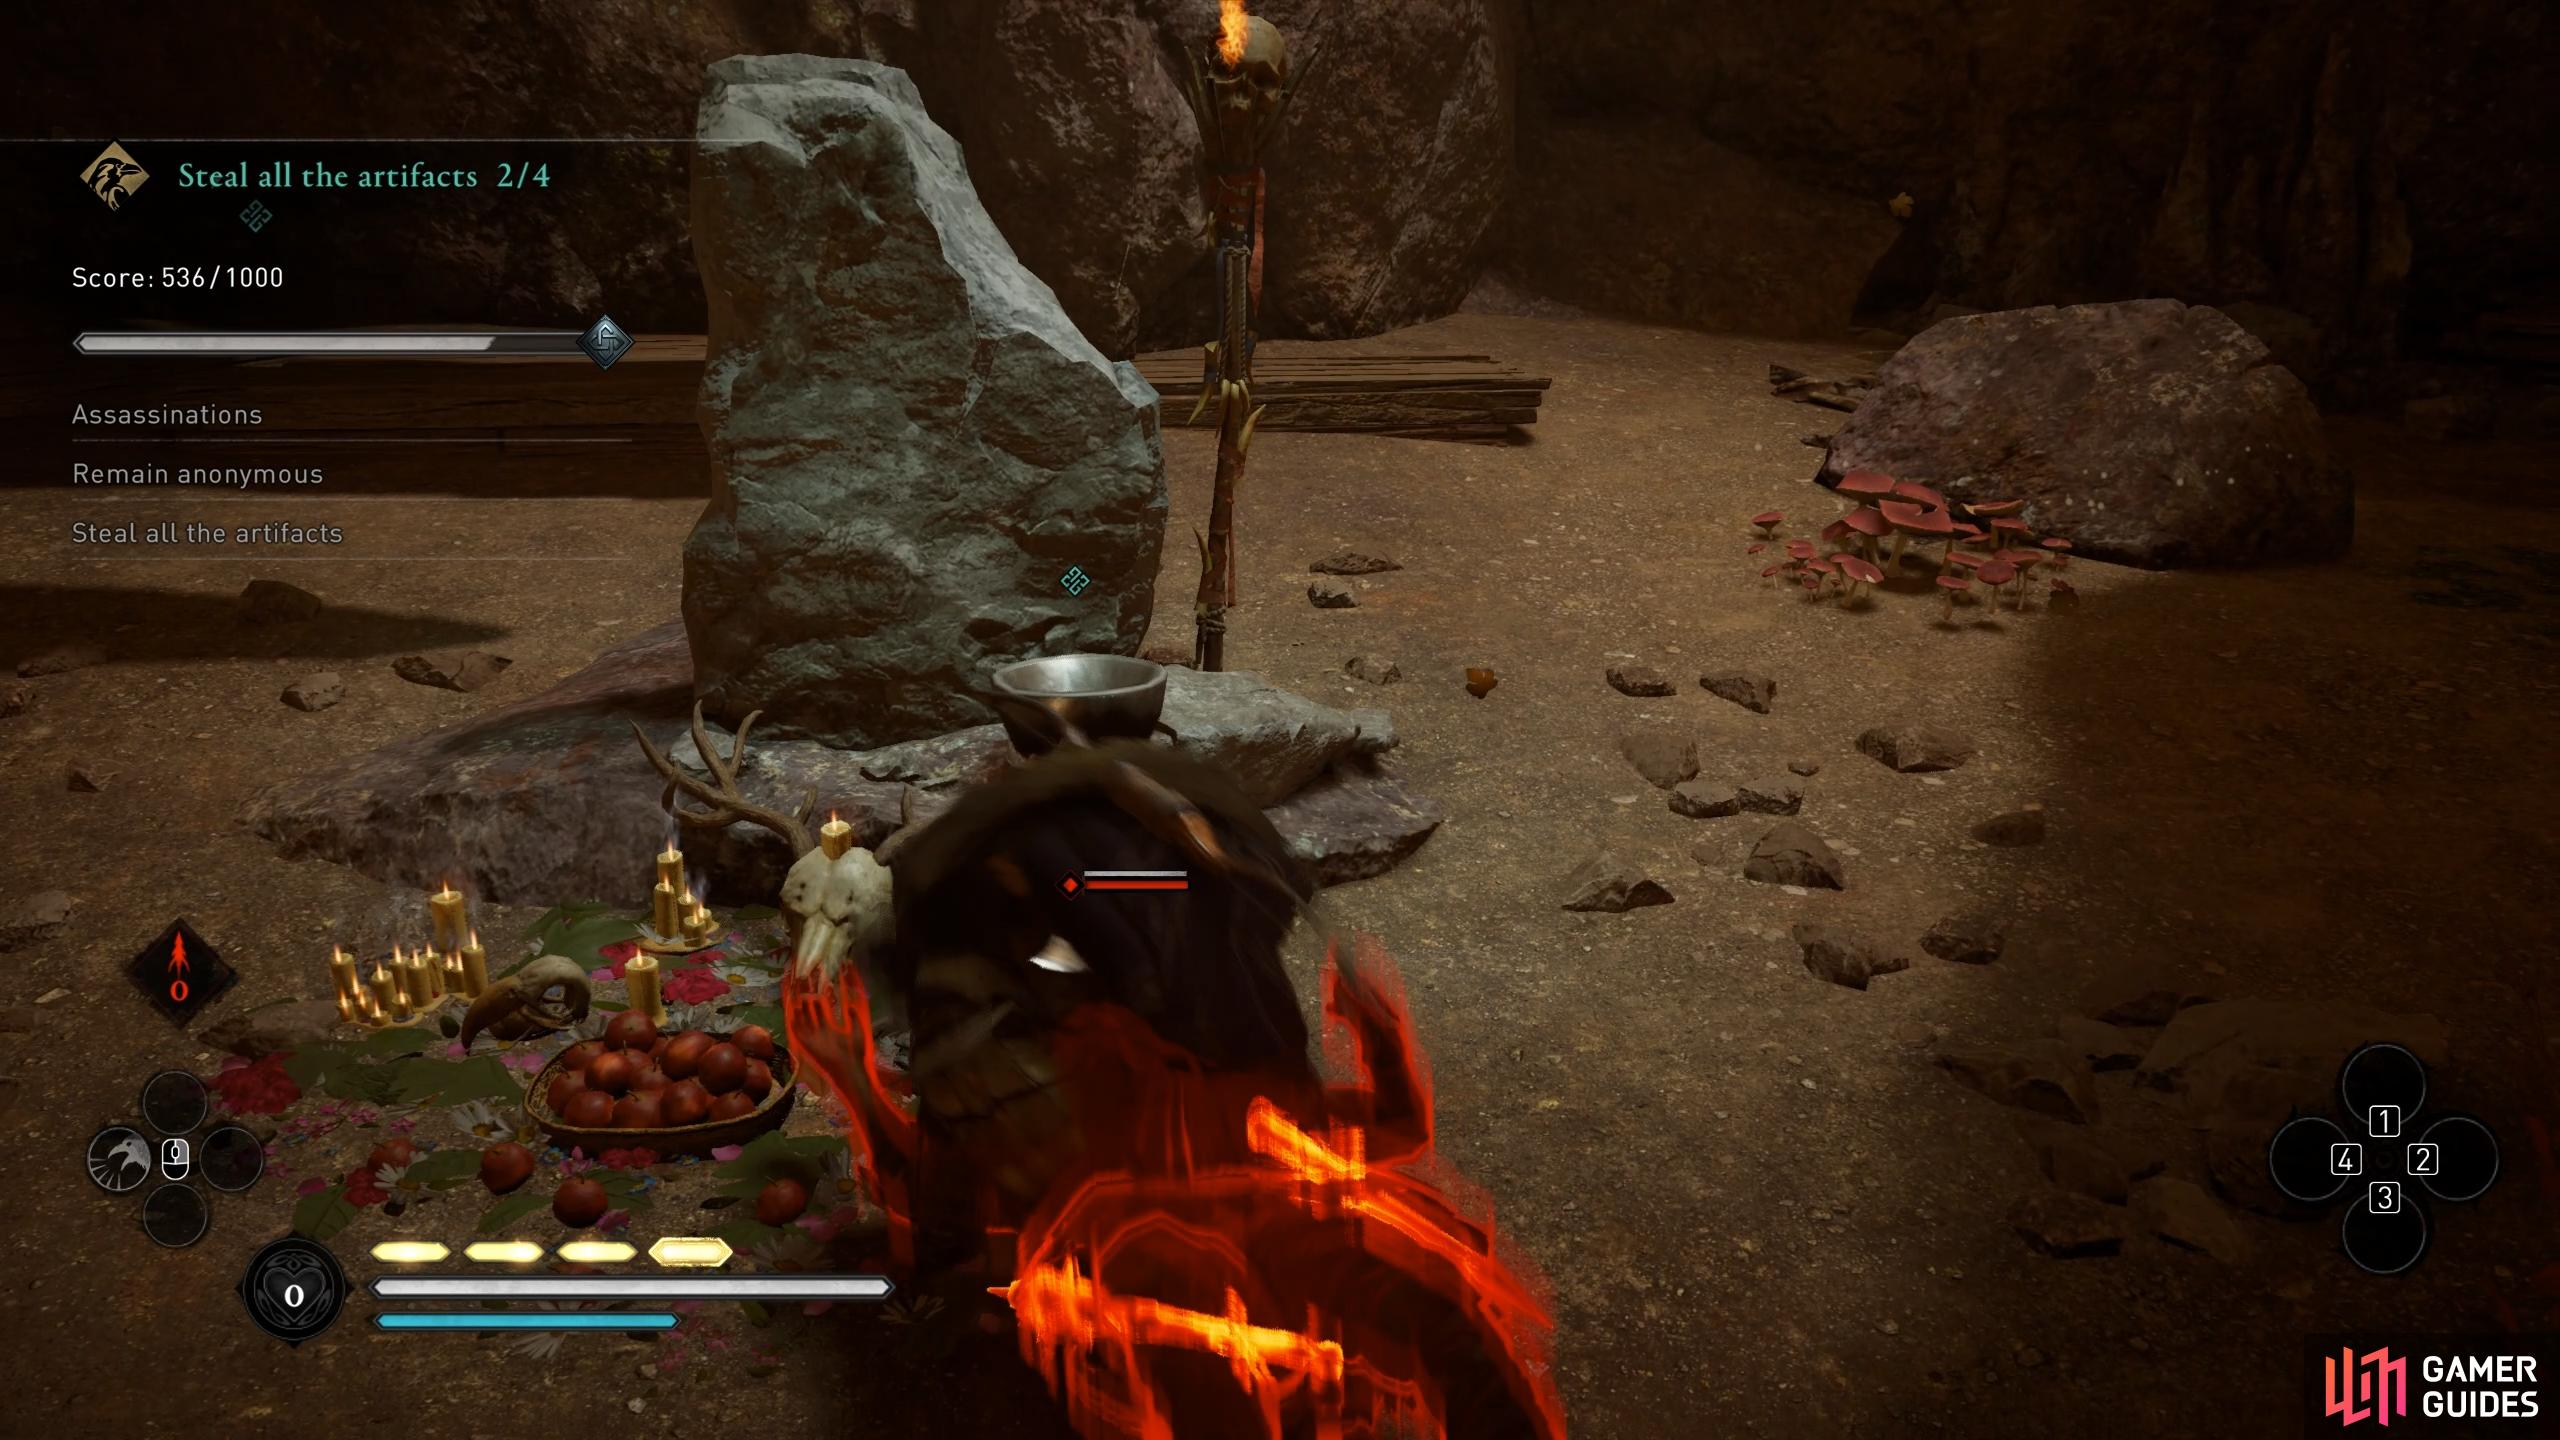 Run at the guard in the cave and assassinate them quickly, then loot the artifact.